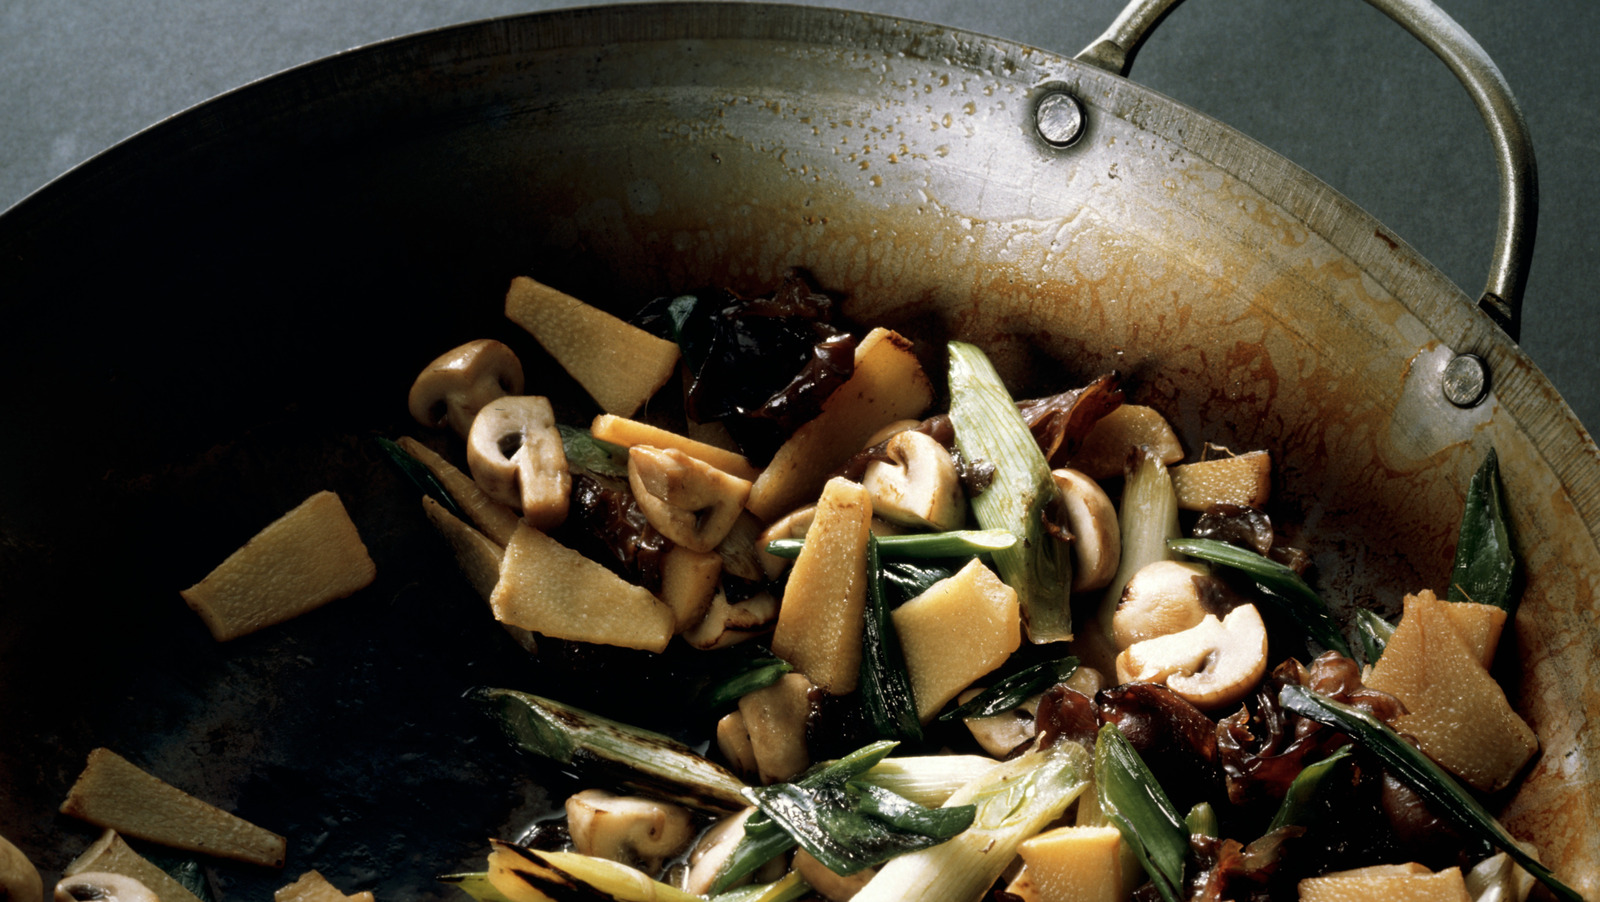 How to Make Stir-fry: The Right Way! - The Woks of Life